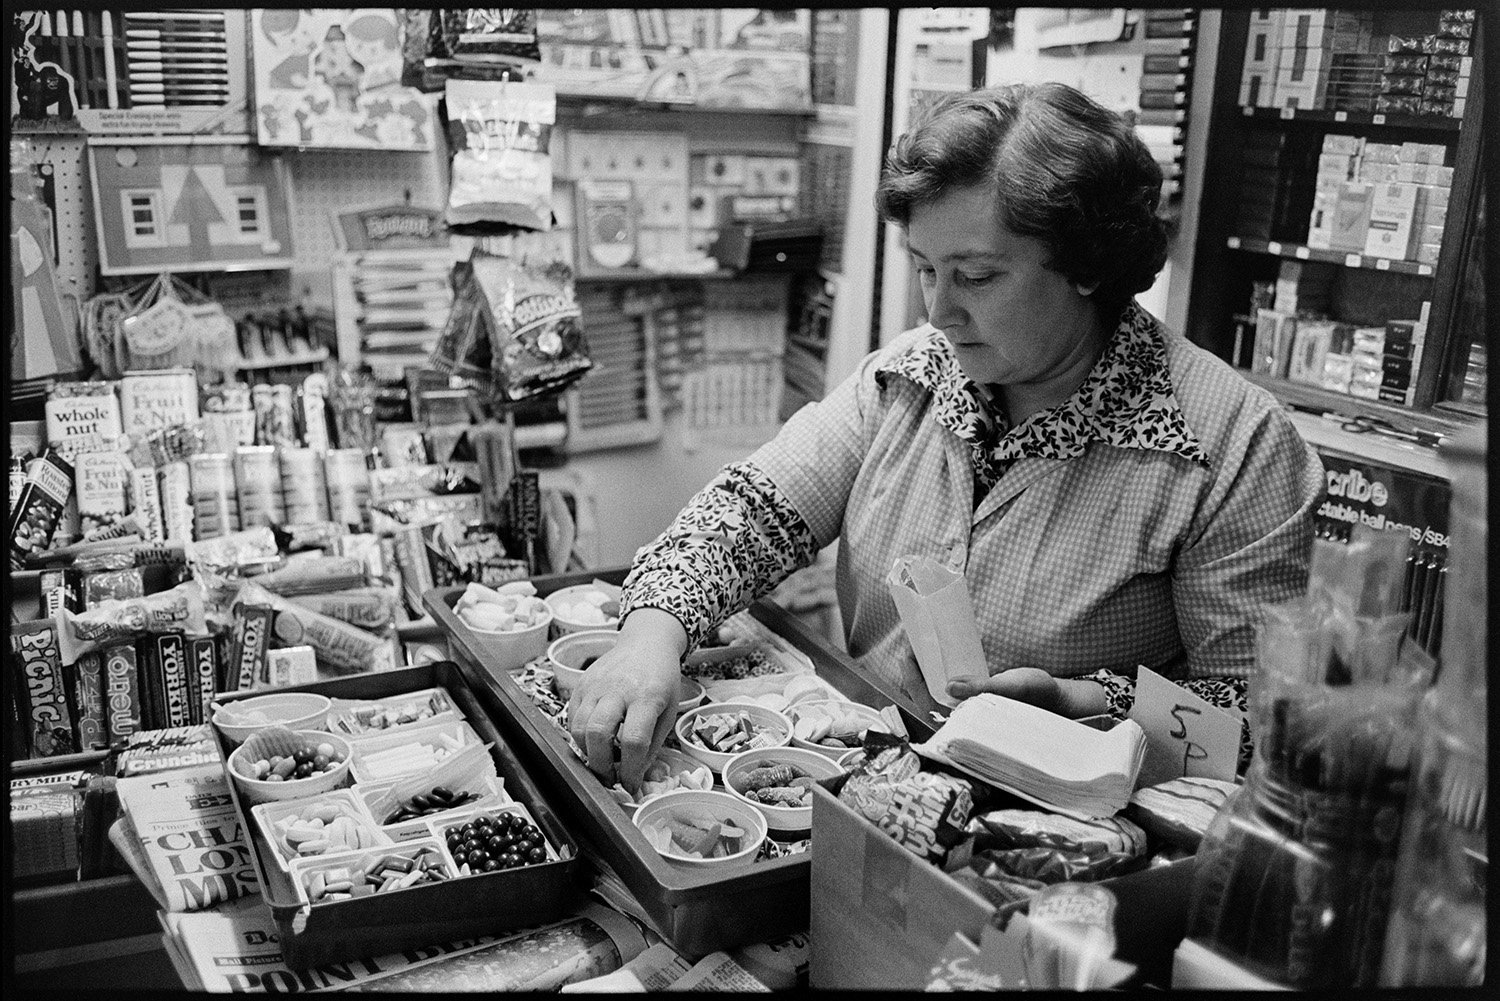 Two women behind counter of shop, sweets and cigarettes on shelf, waiting for children. 
[Joyce Jones sorting pots of sweets in a tray in her shop in Winkleigh Square. Chocolate bars and bags of sweets are displayed on the shelf behind her.]